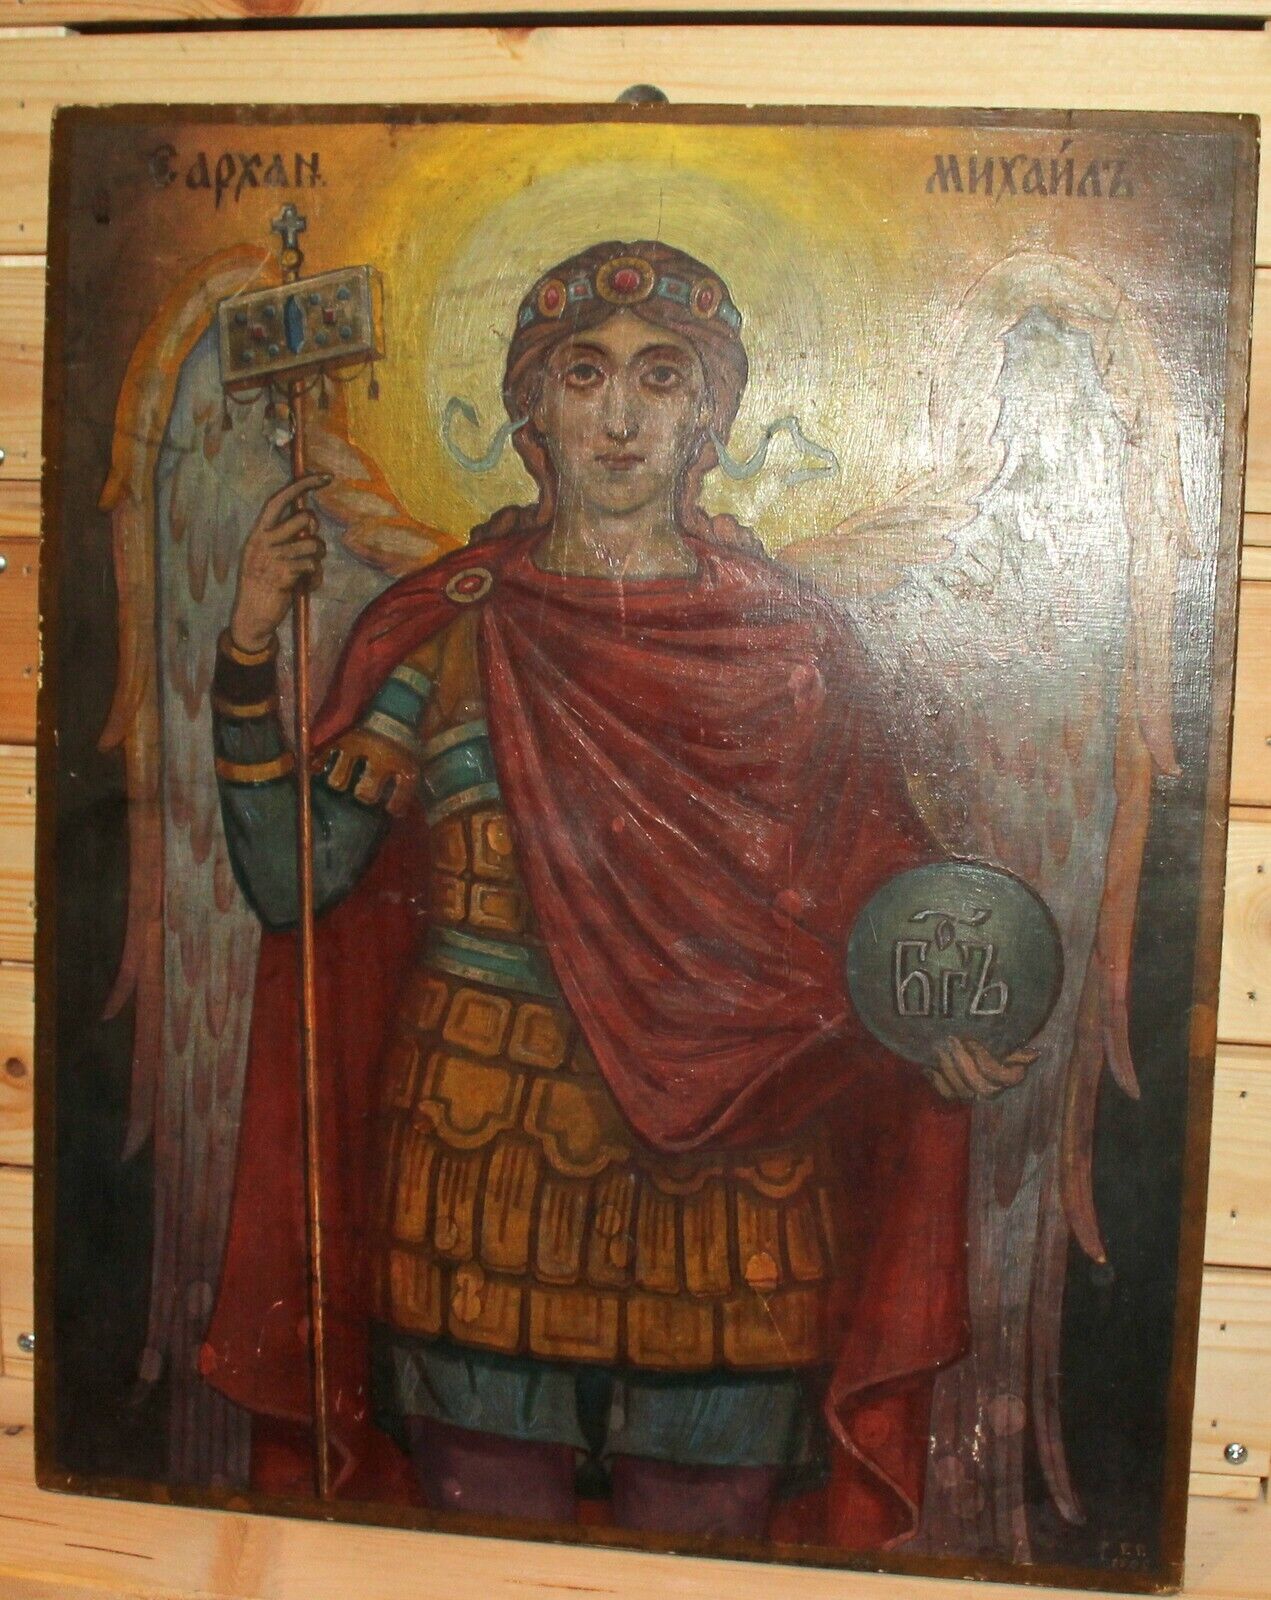 1968 Religious hand painted oil/wood icon painting Archangel Michael